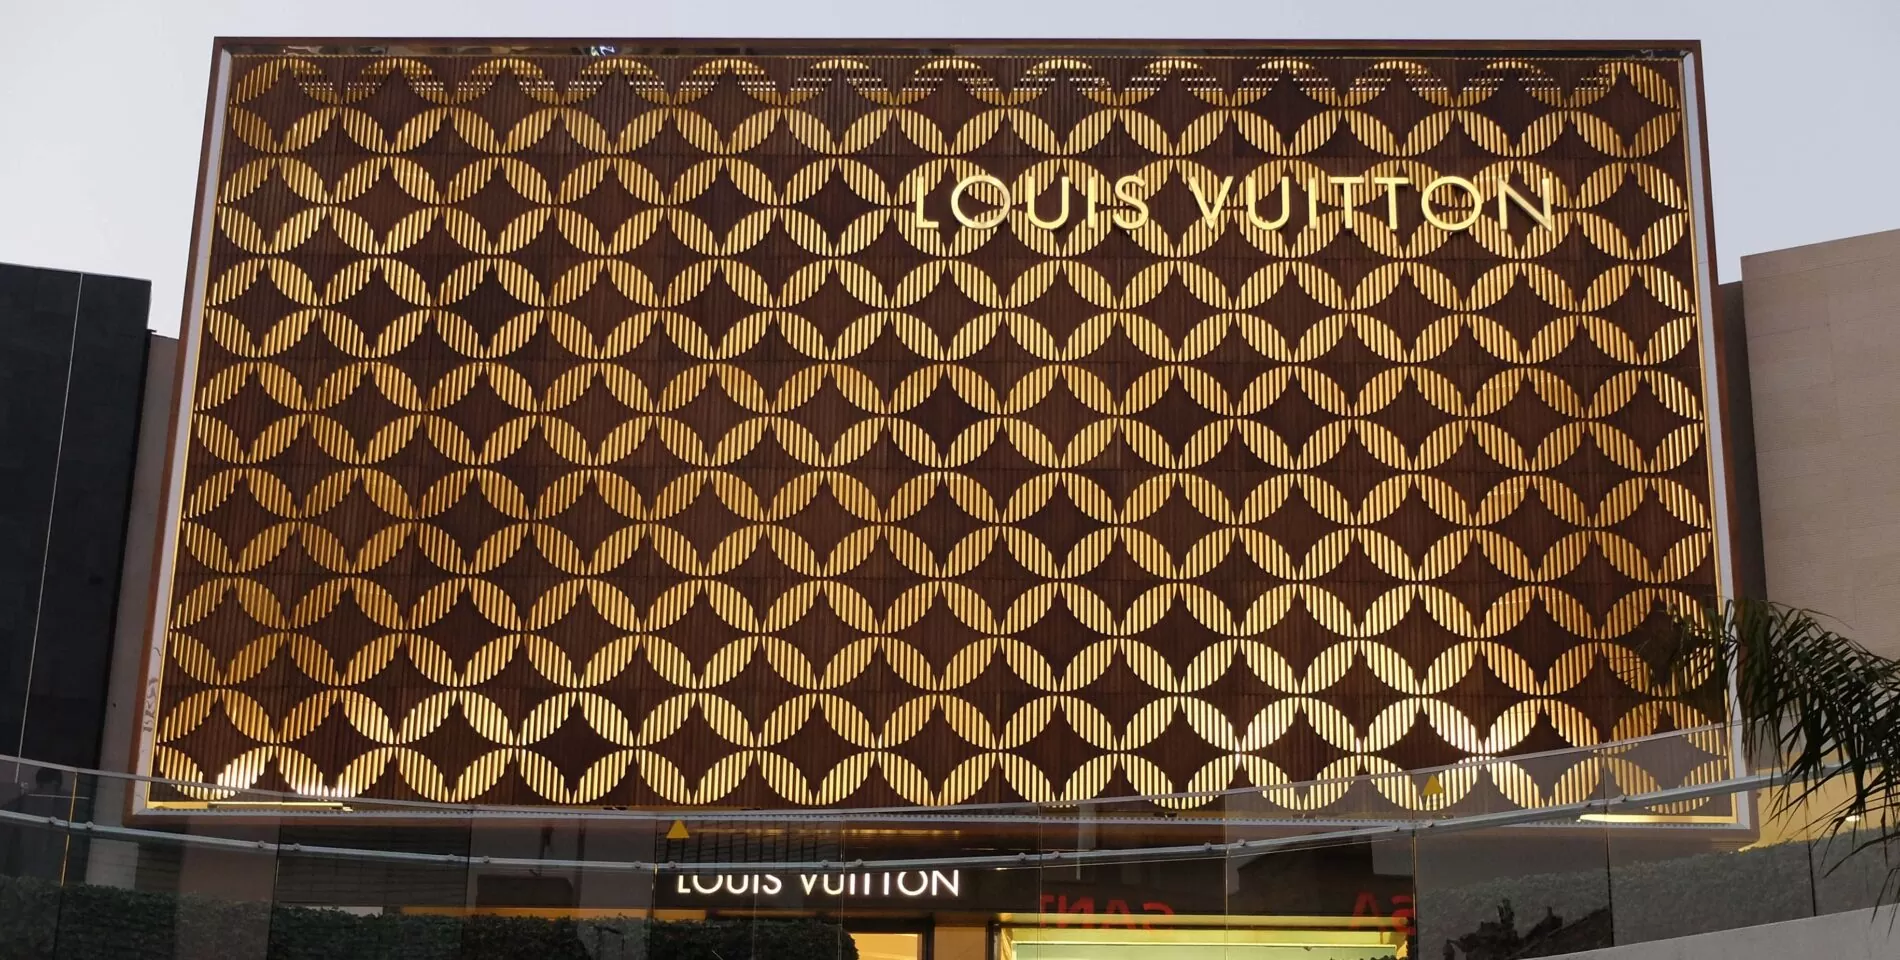 Where can I find a Louis Vuitton outlet online  Quora